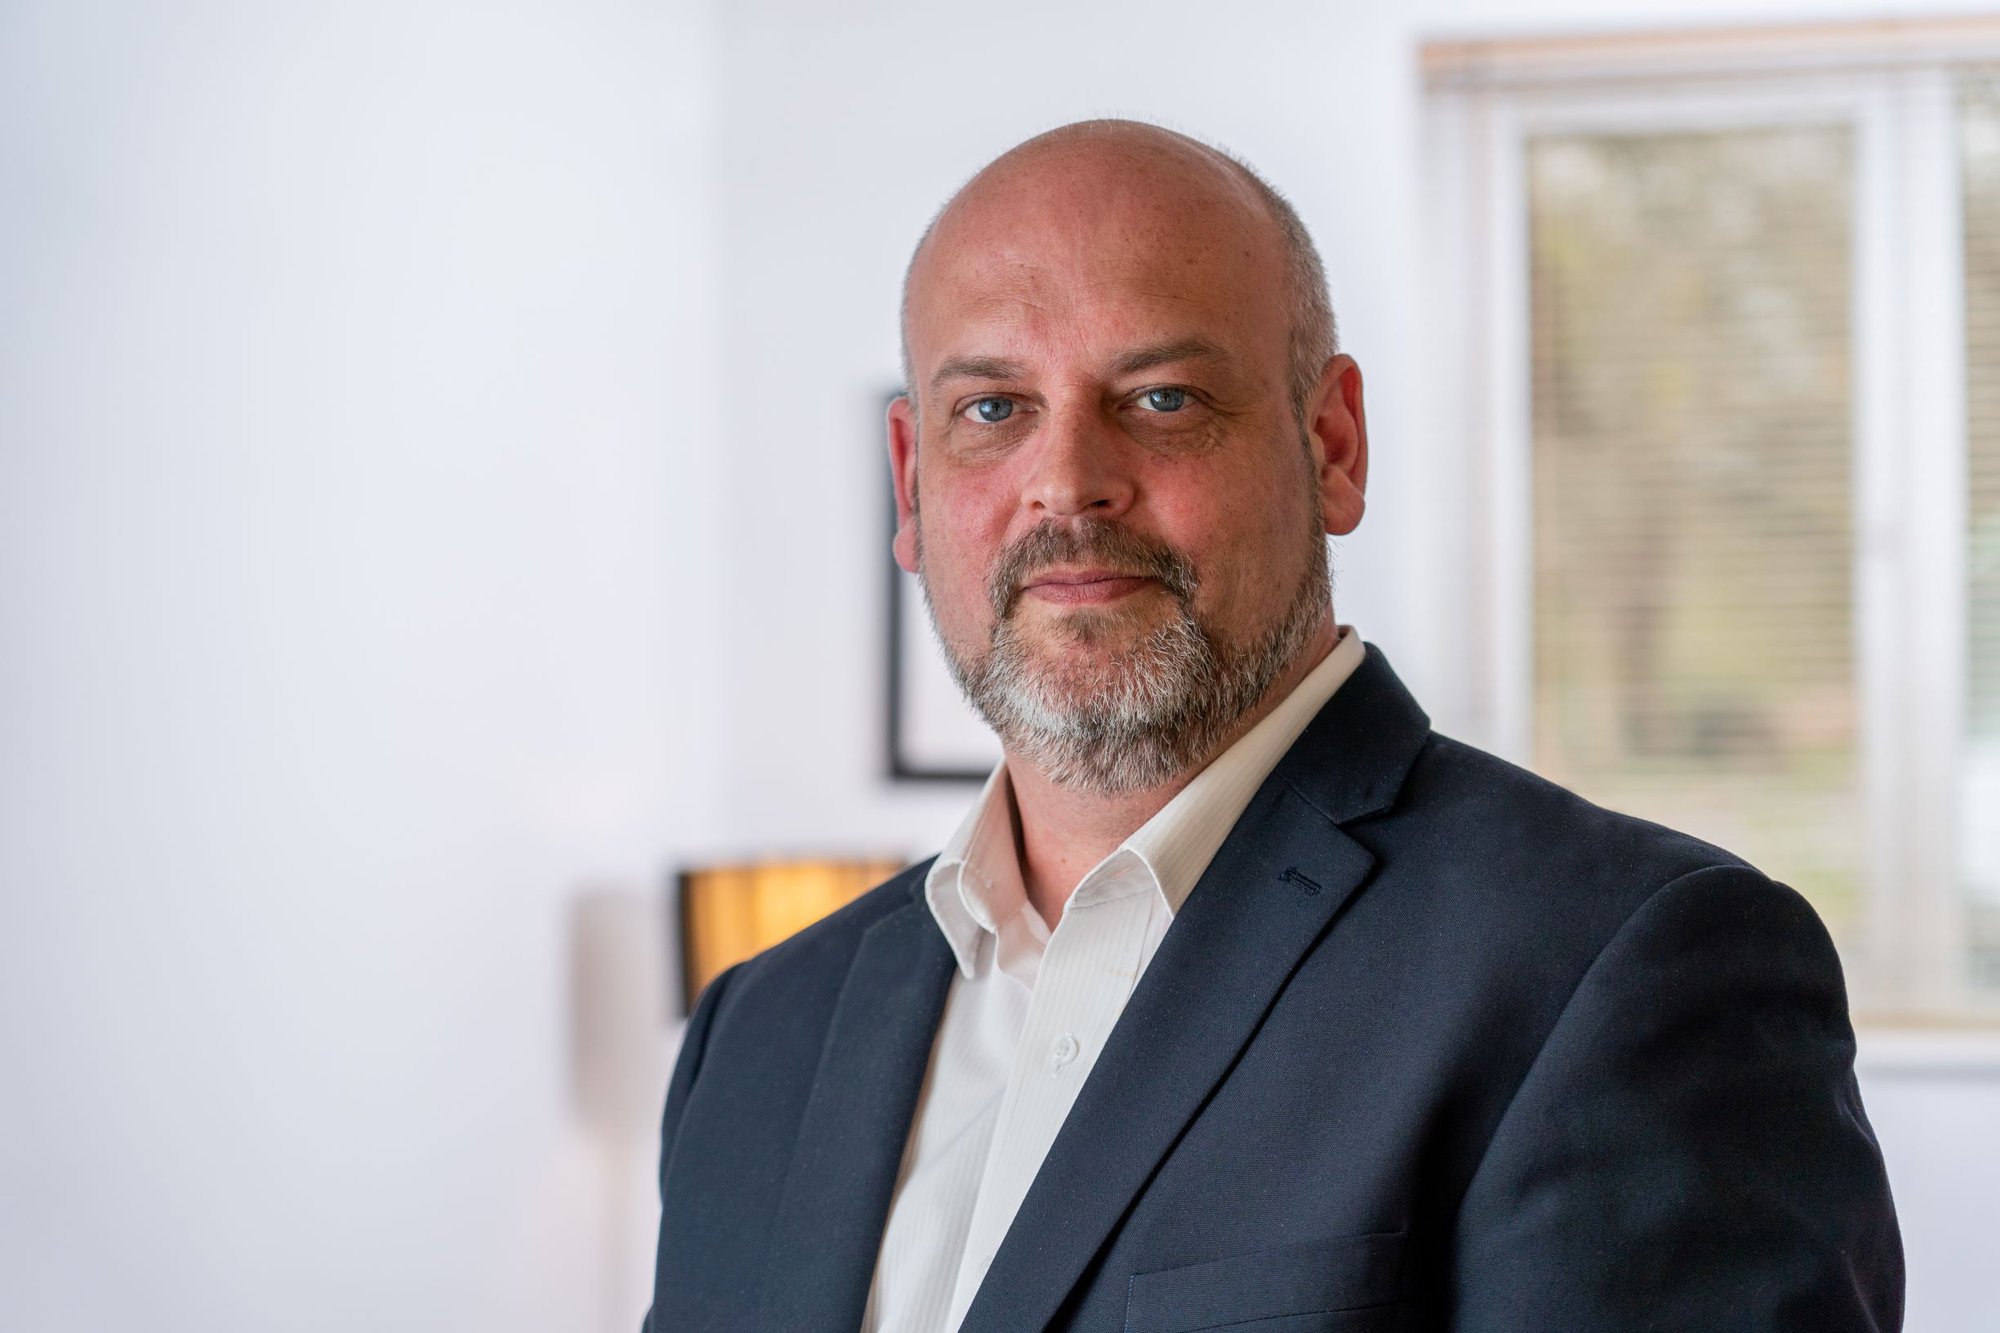 Matt Azzopardi joins Worldsensing as Sales Area Manager for Europe